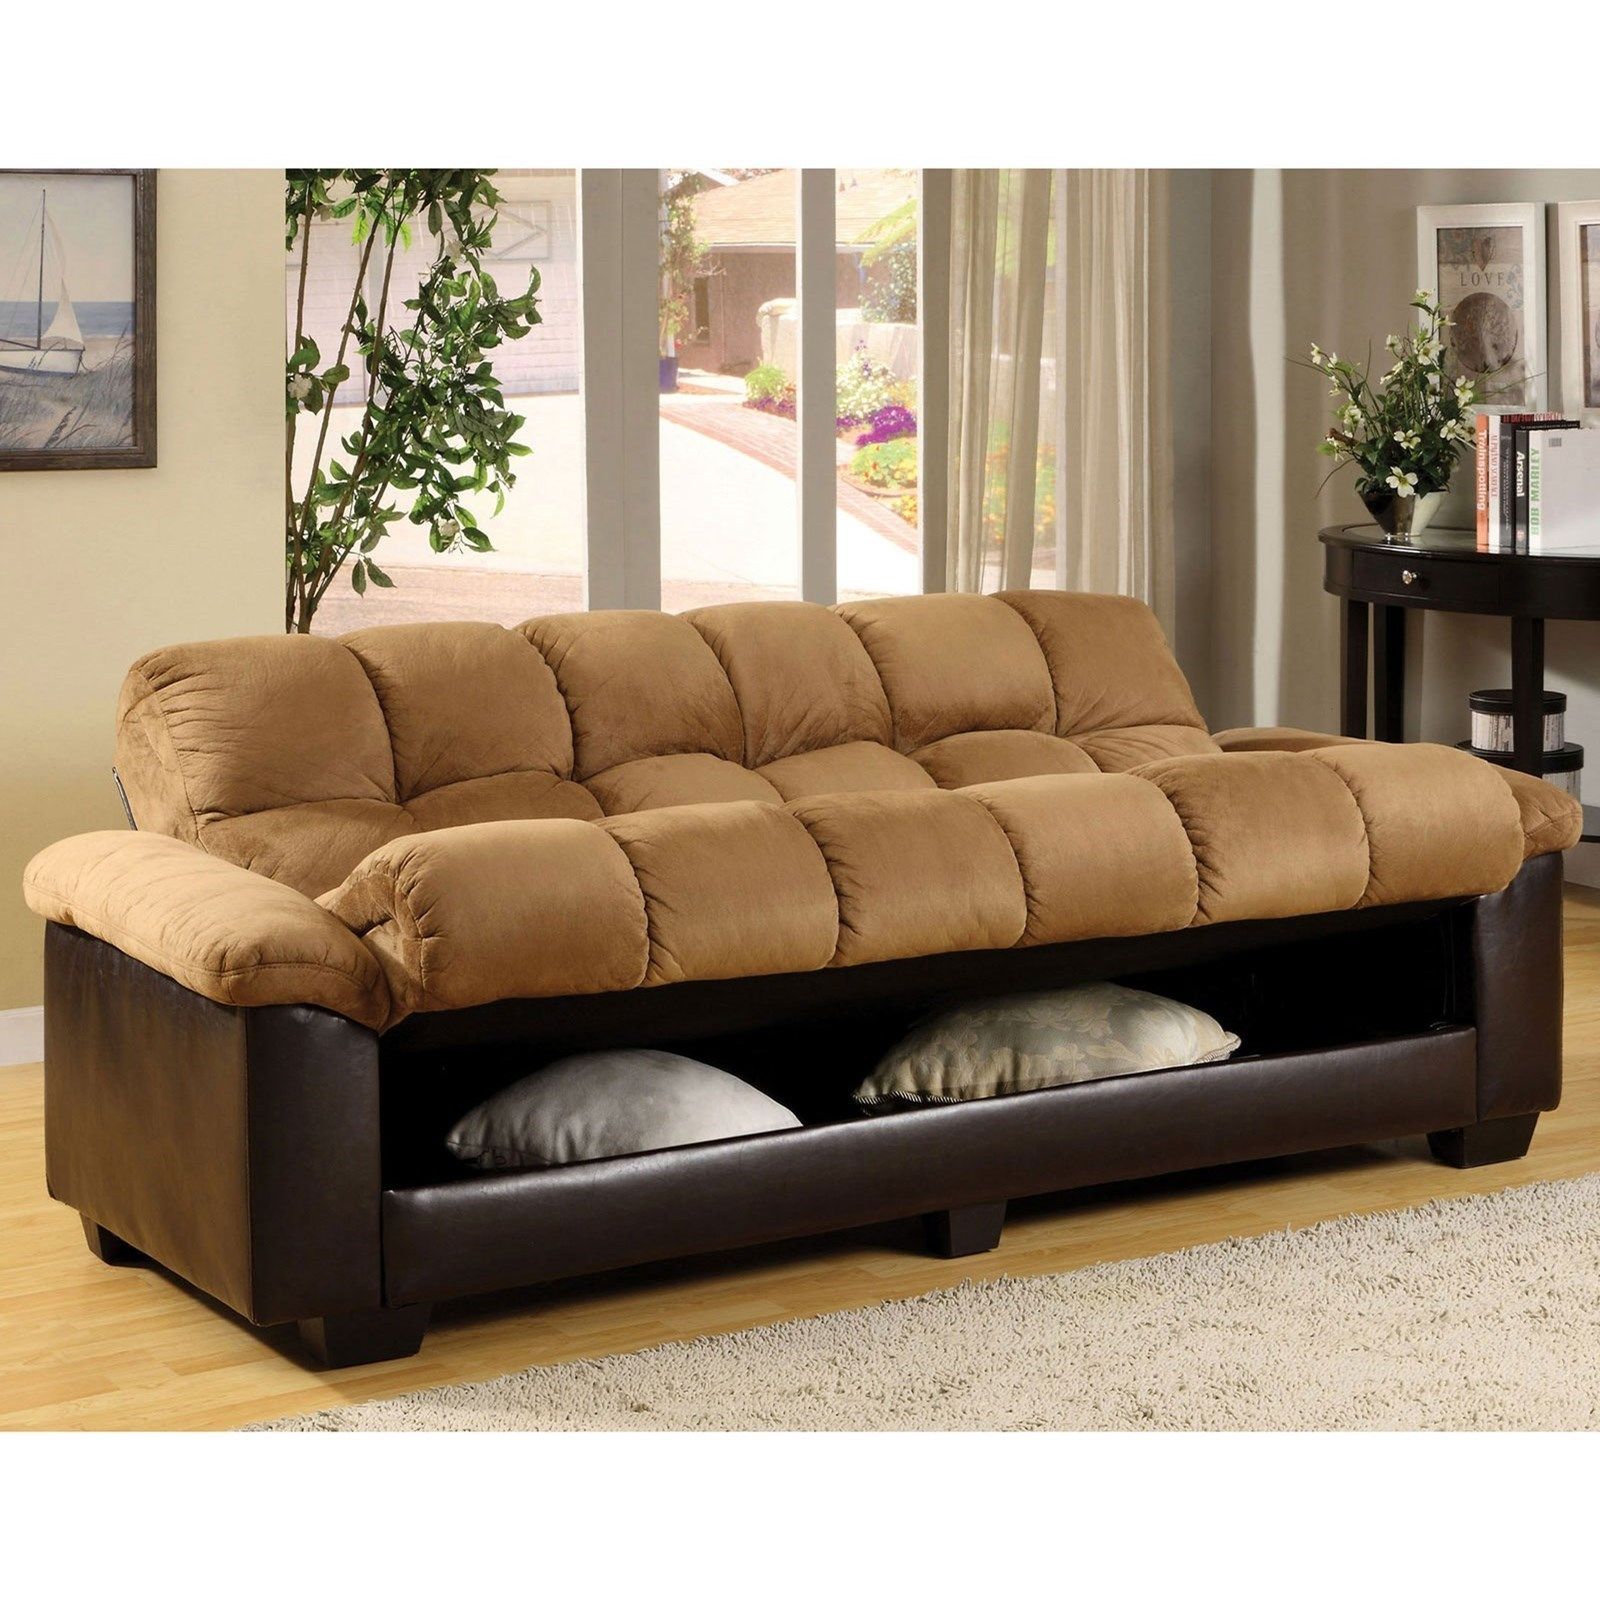 Furniture Of America Cozy Microfiber Futon Sofa Bed With Within Celine Sectional Futon Sofas With Storage Reclining Couch (View 13 of 15)